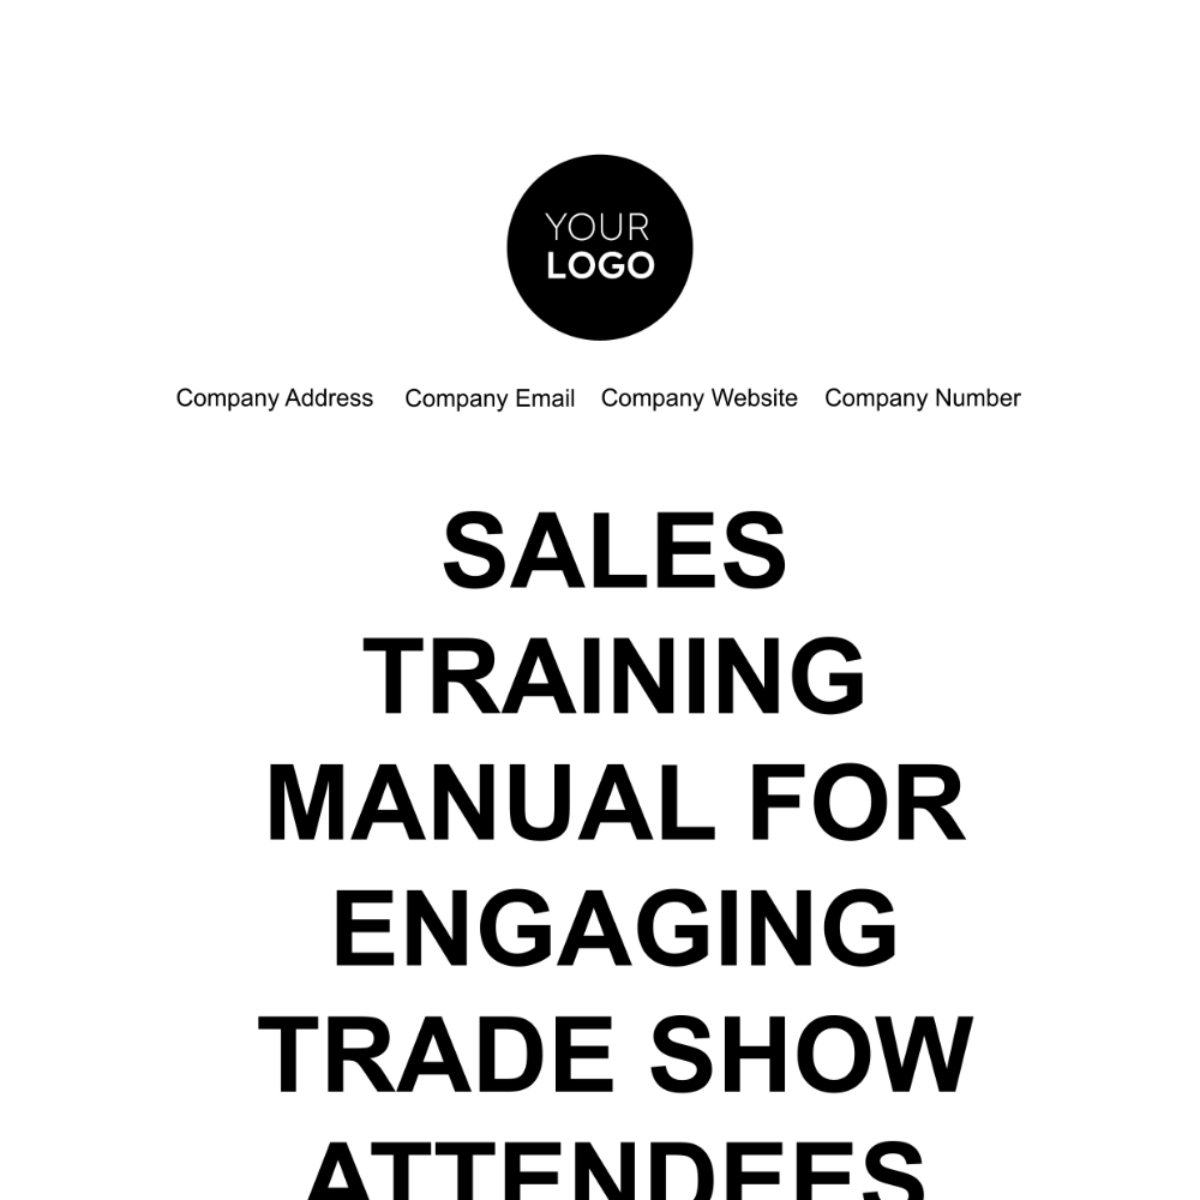 Sales Training Manual for Engaging Trade Show Attendees Template